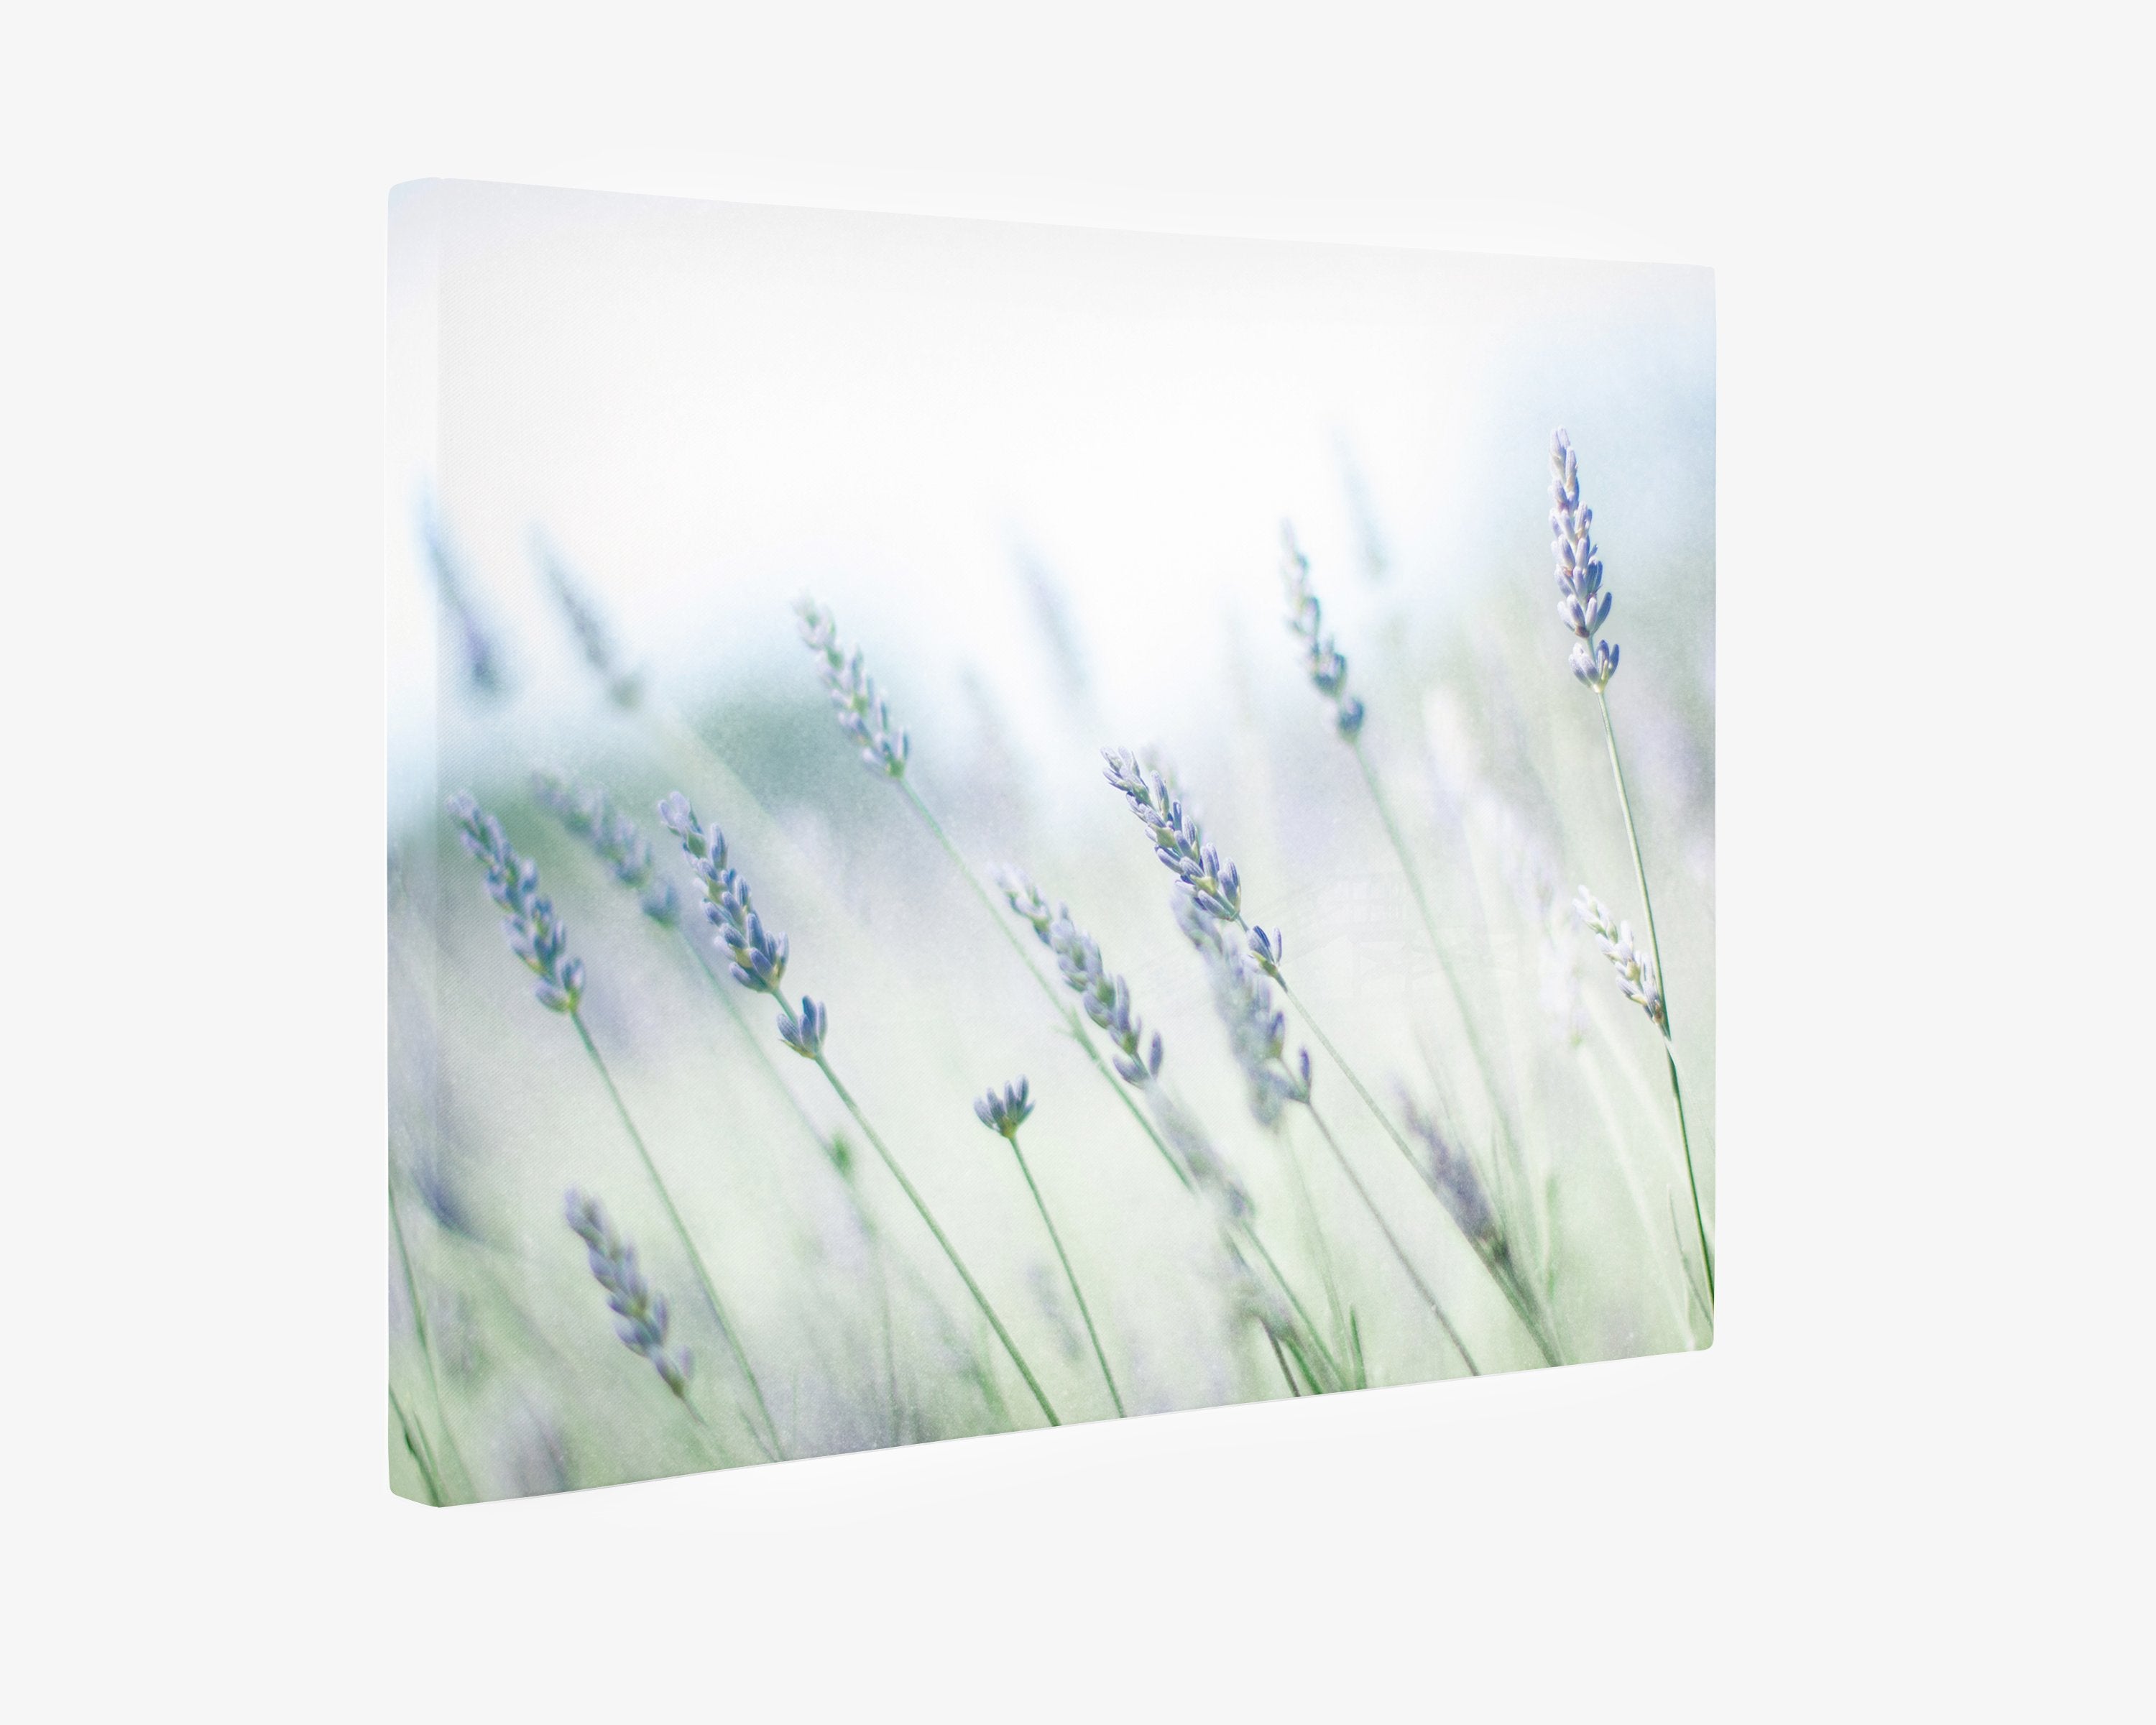 A Rustic Farmhouse canvas gallery wrap featuring a soft-focus image of lavender flowers, with a gentle gradient of green to blue hues creating a serene and dreamy atmosphere by Offley Green.